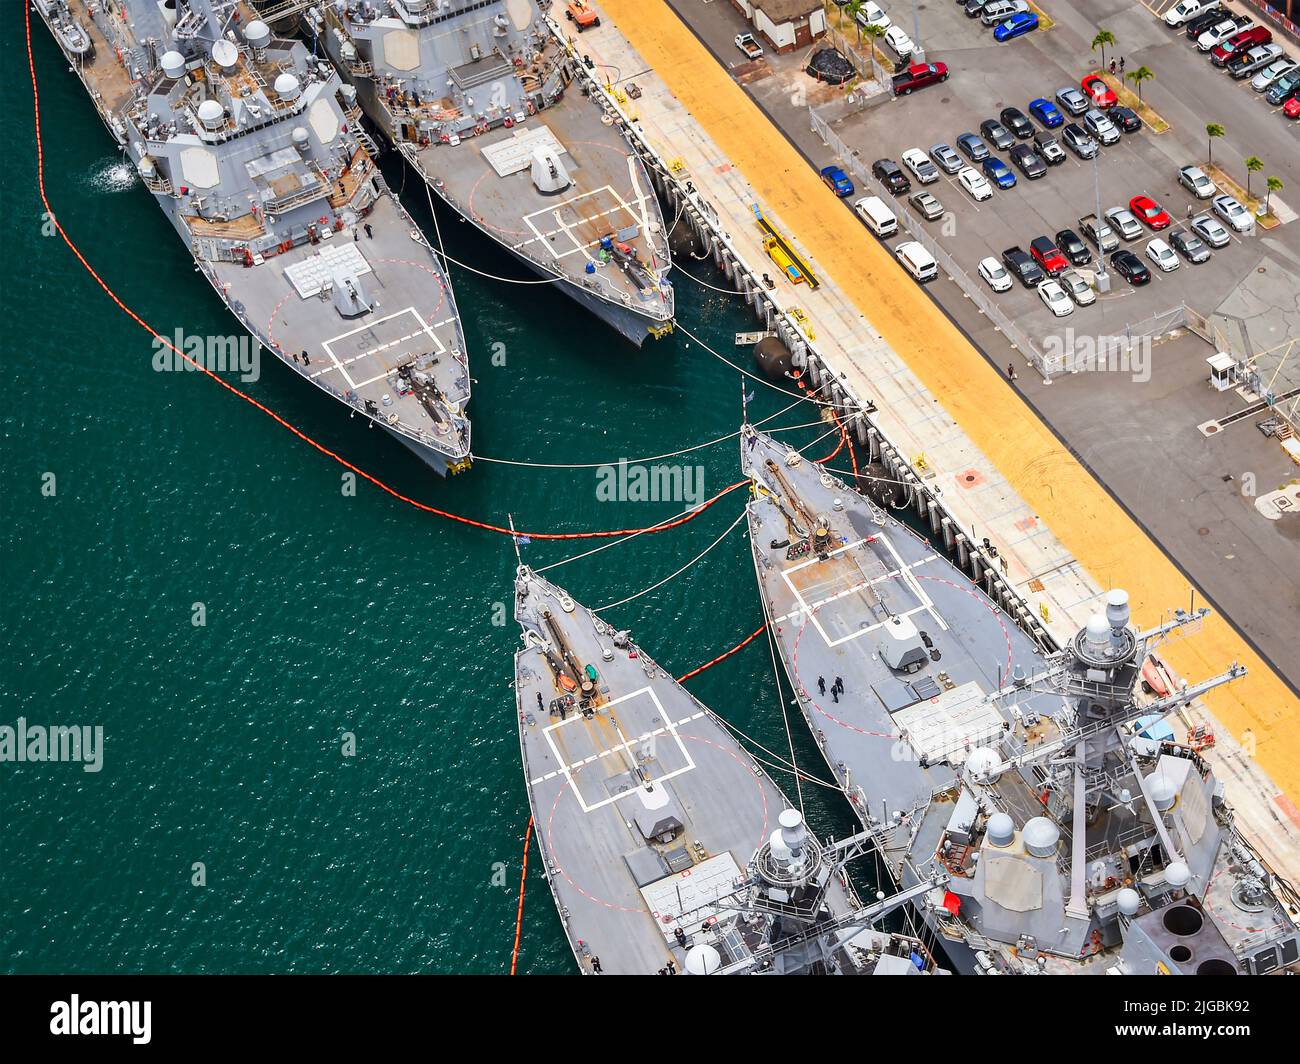 Pearl Harbor, United States. 07 July, 2022. Aerial view of U.S. Navy destroyers moored bow to bow during Rim of the Pacific 2022 at Joint Base Pearl Harbor-Hickham July 7, 2022 in Pearl Harbor, Hawaii. Twenty-six nations, 38 ships, four submarines, 170 aircraft and 25,000 personnel are participating in RIMPAC.  Credit: MCS Leon Vonguyen/Planetpix/Alamy Live News Stock Photo